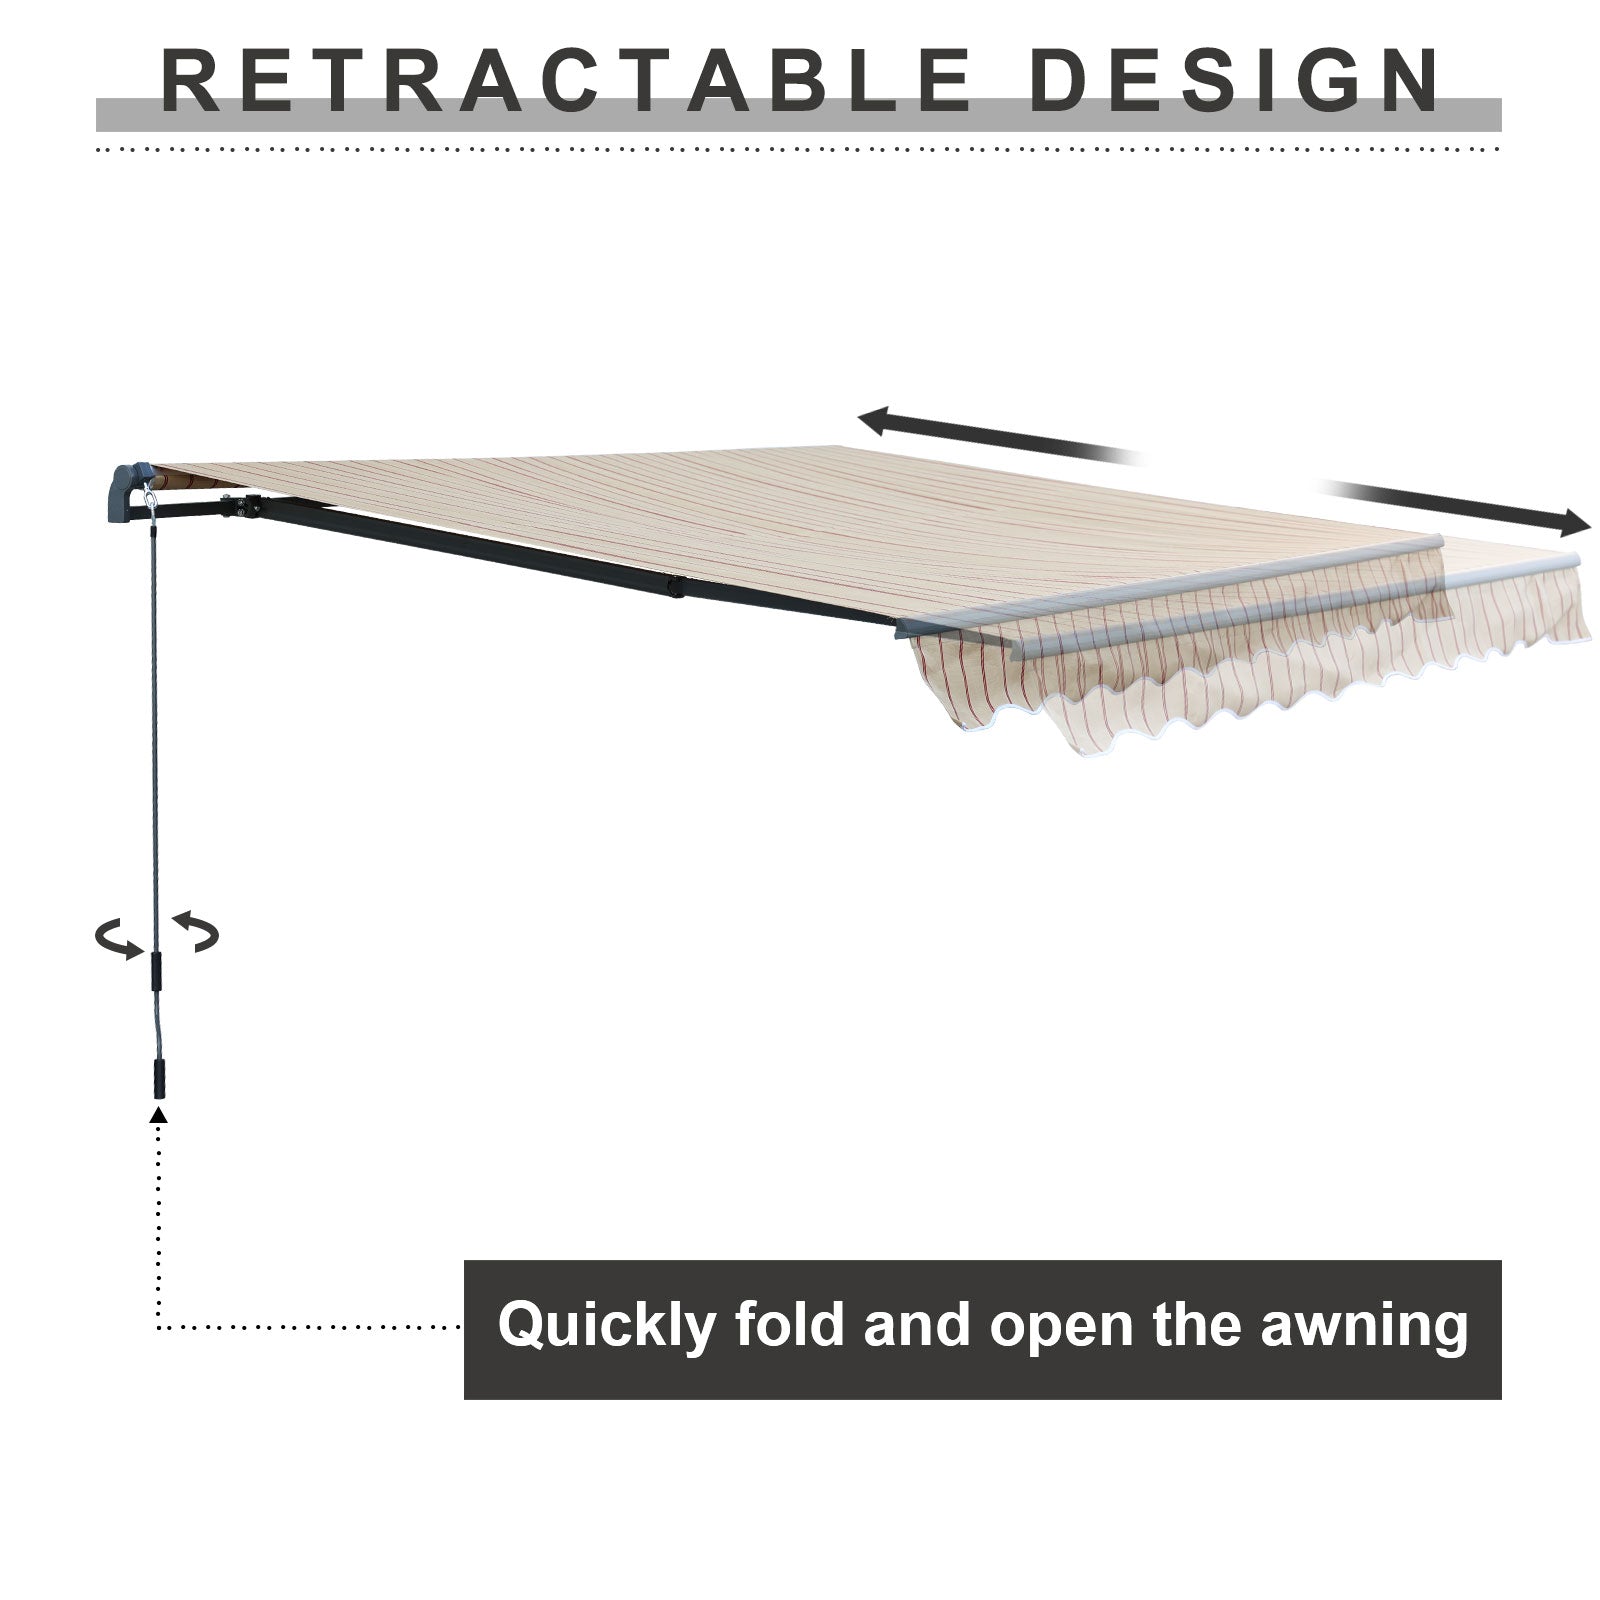 12'x  8' x 5' Retractable Window Awning Sunshade Shelter,Polyester Fabric,with Brackets and Two Wall Bases  Aoodor   